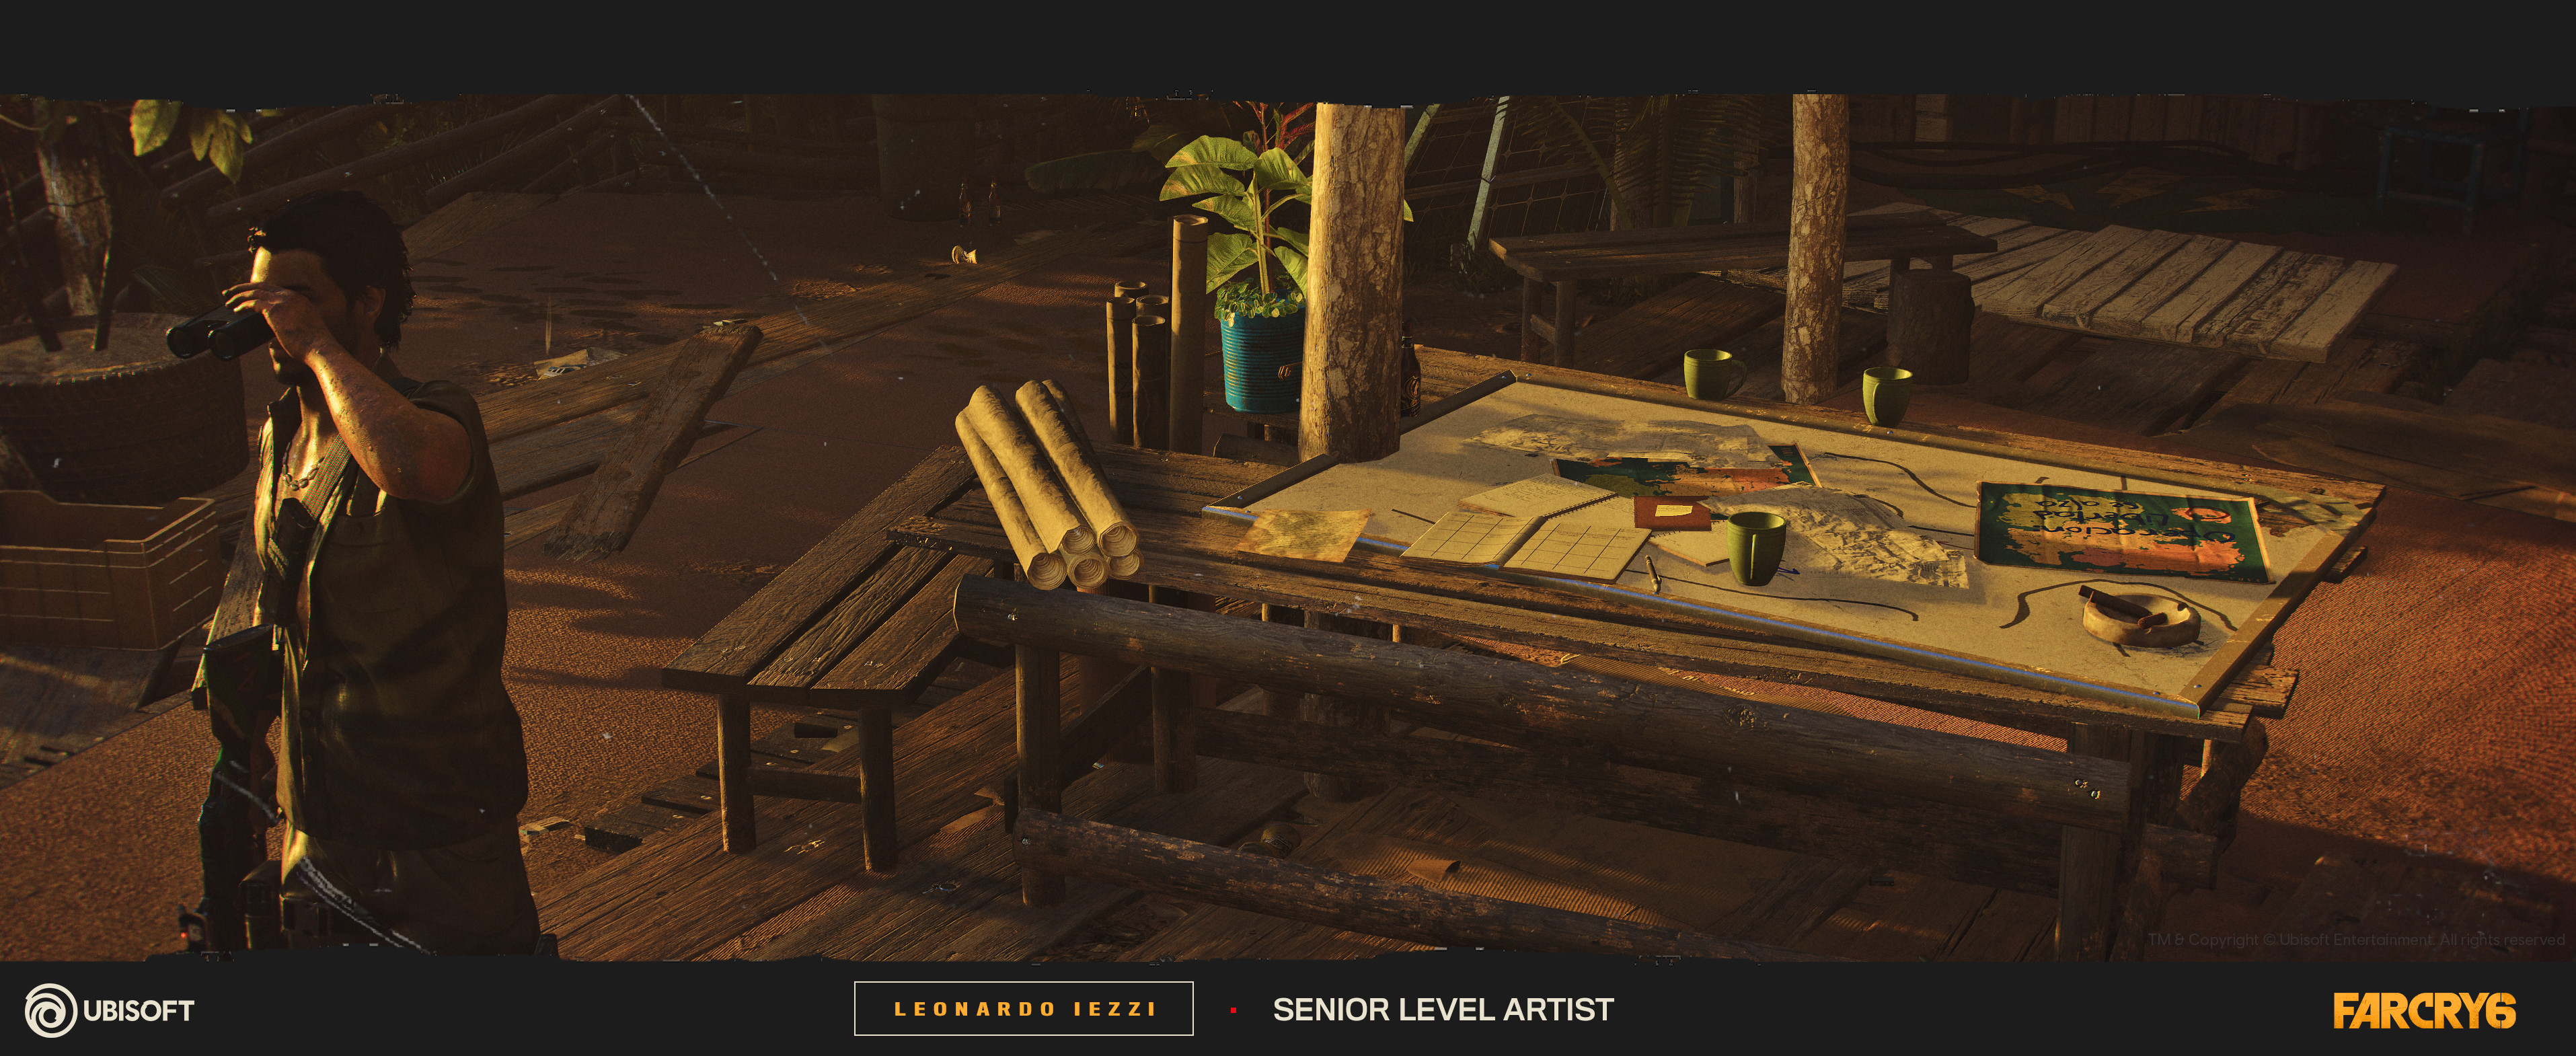 Screenshot of the upper tent framing a table with maps and a guy on the left using binoculars